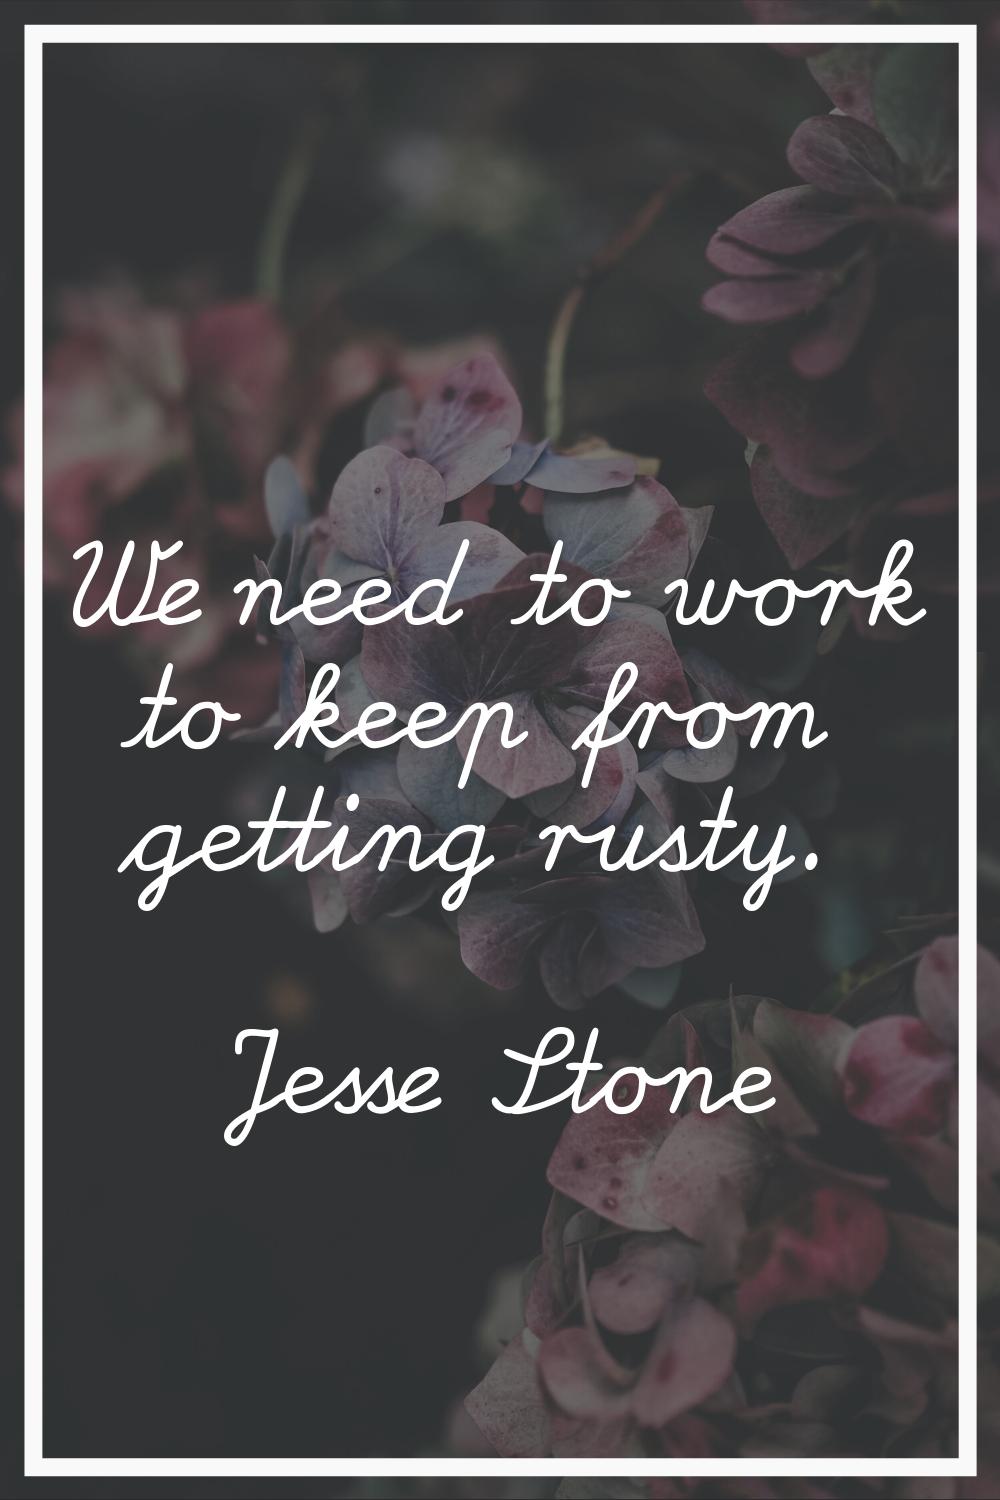 We need to work to keep from getting rusty.